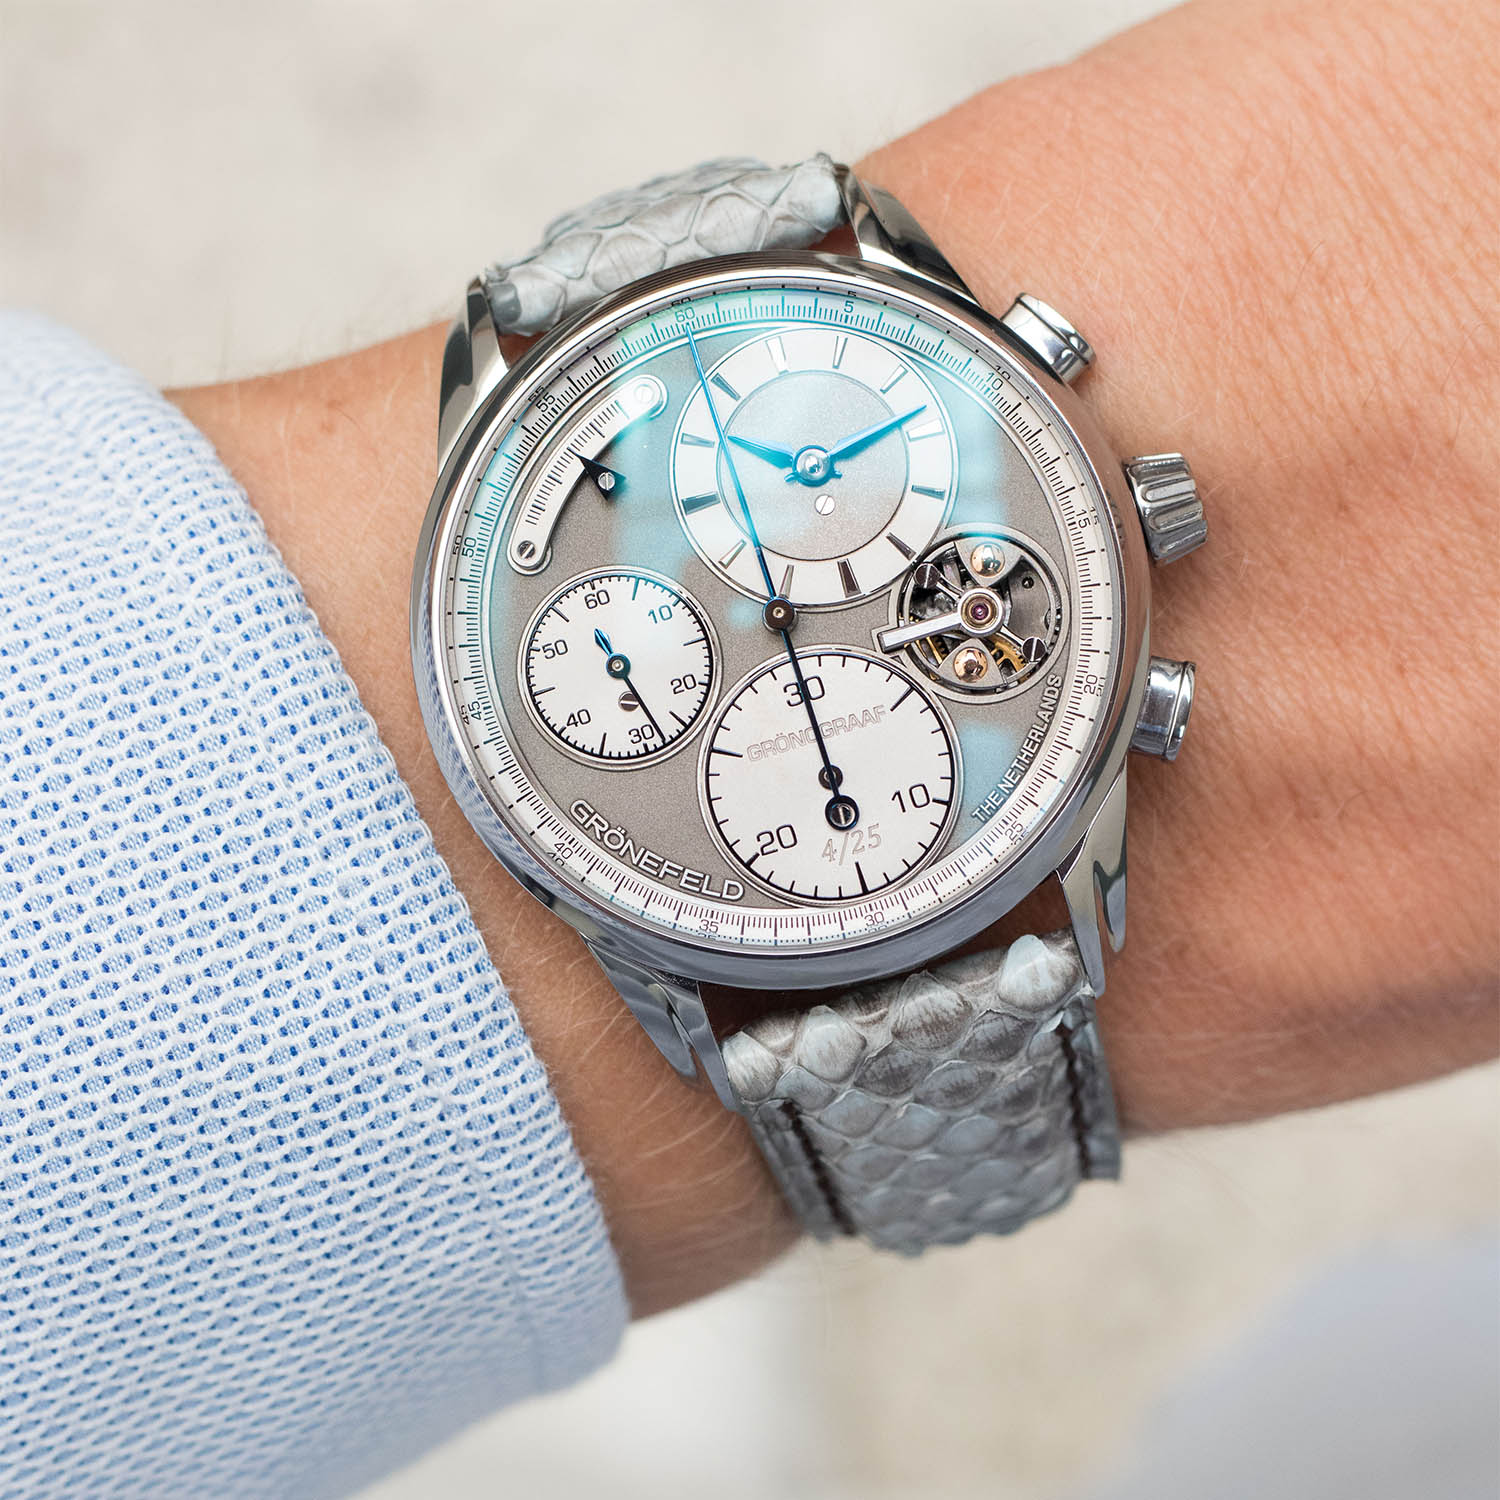 Gronefeld 1941 Gronograaf - first chronograph Horological Brothers